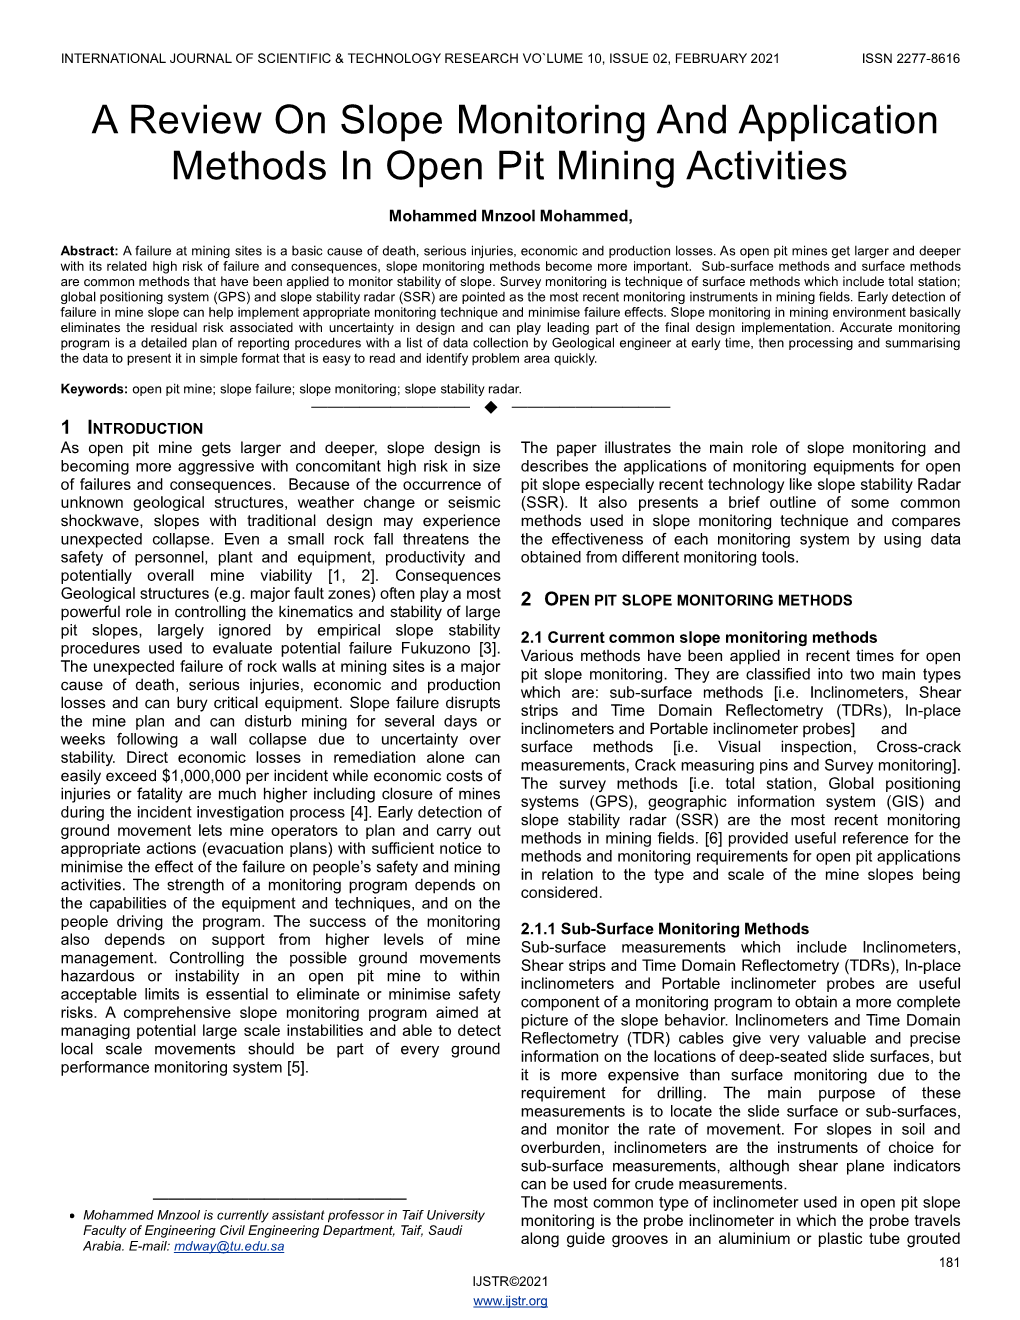 A Review on Slope Monitoring and Application Methods in Open Pit Mining Activities